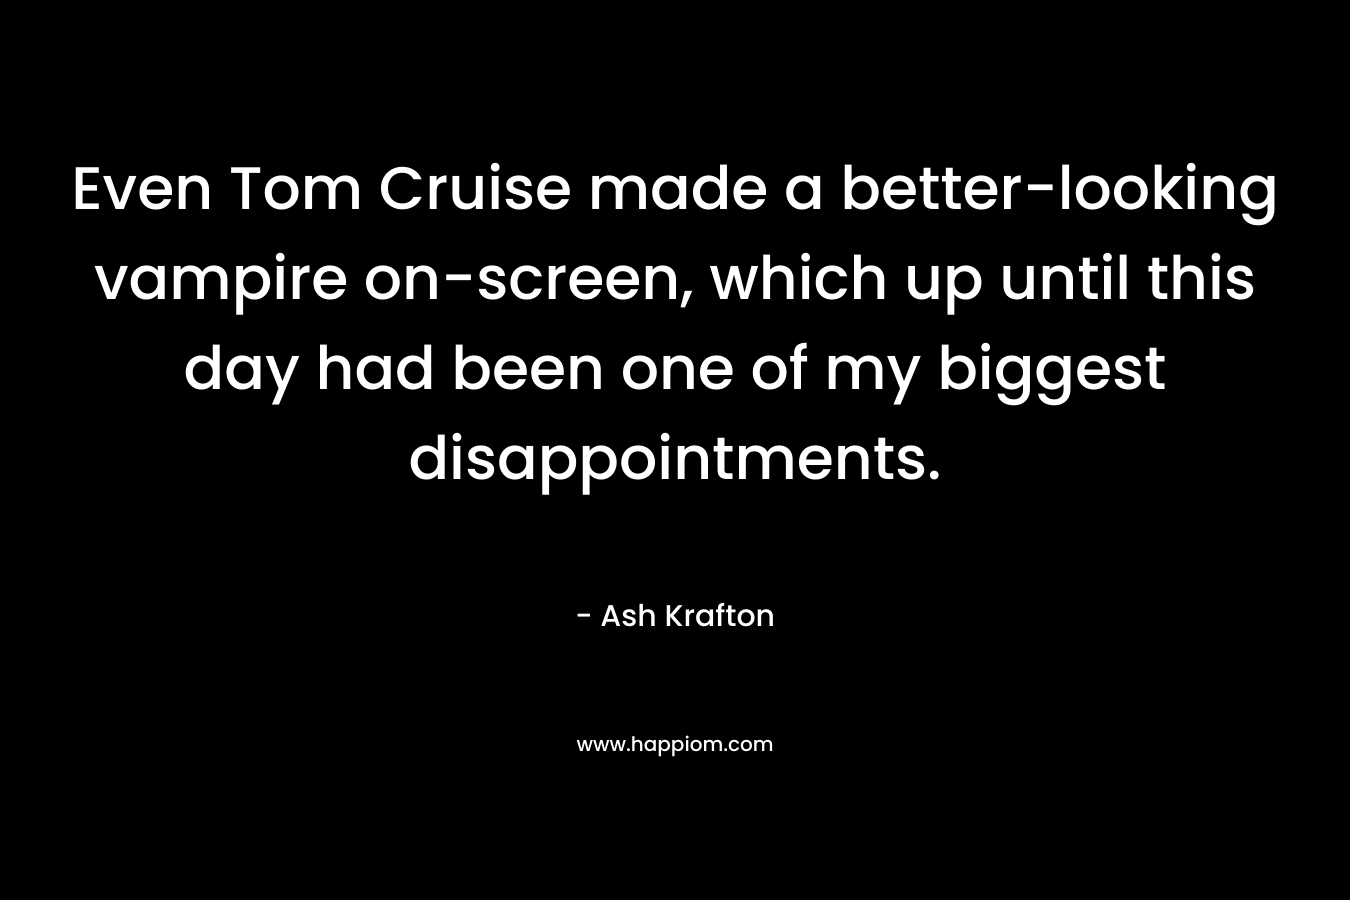 Even Tom Cruise made a better-looking vampire on-screen, which up until this day had been one of my biggest disappointments. – Ash Krafton